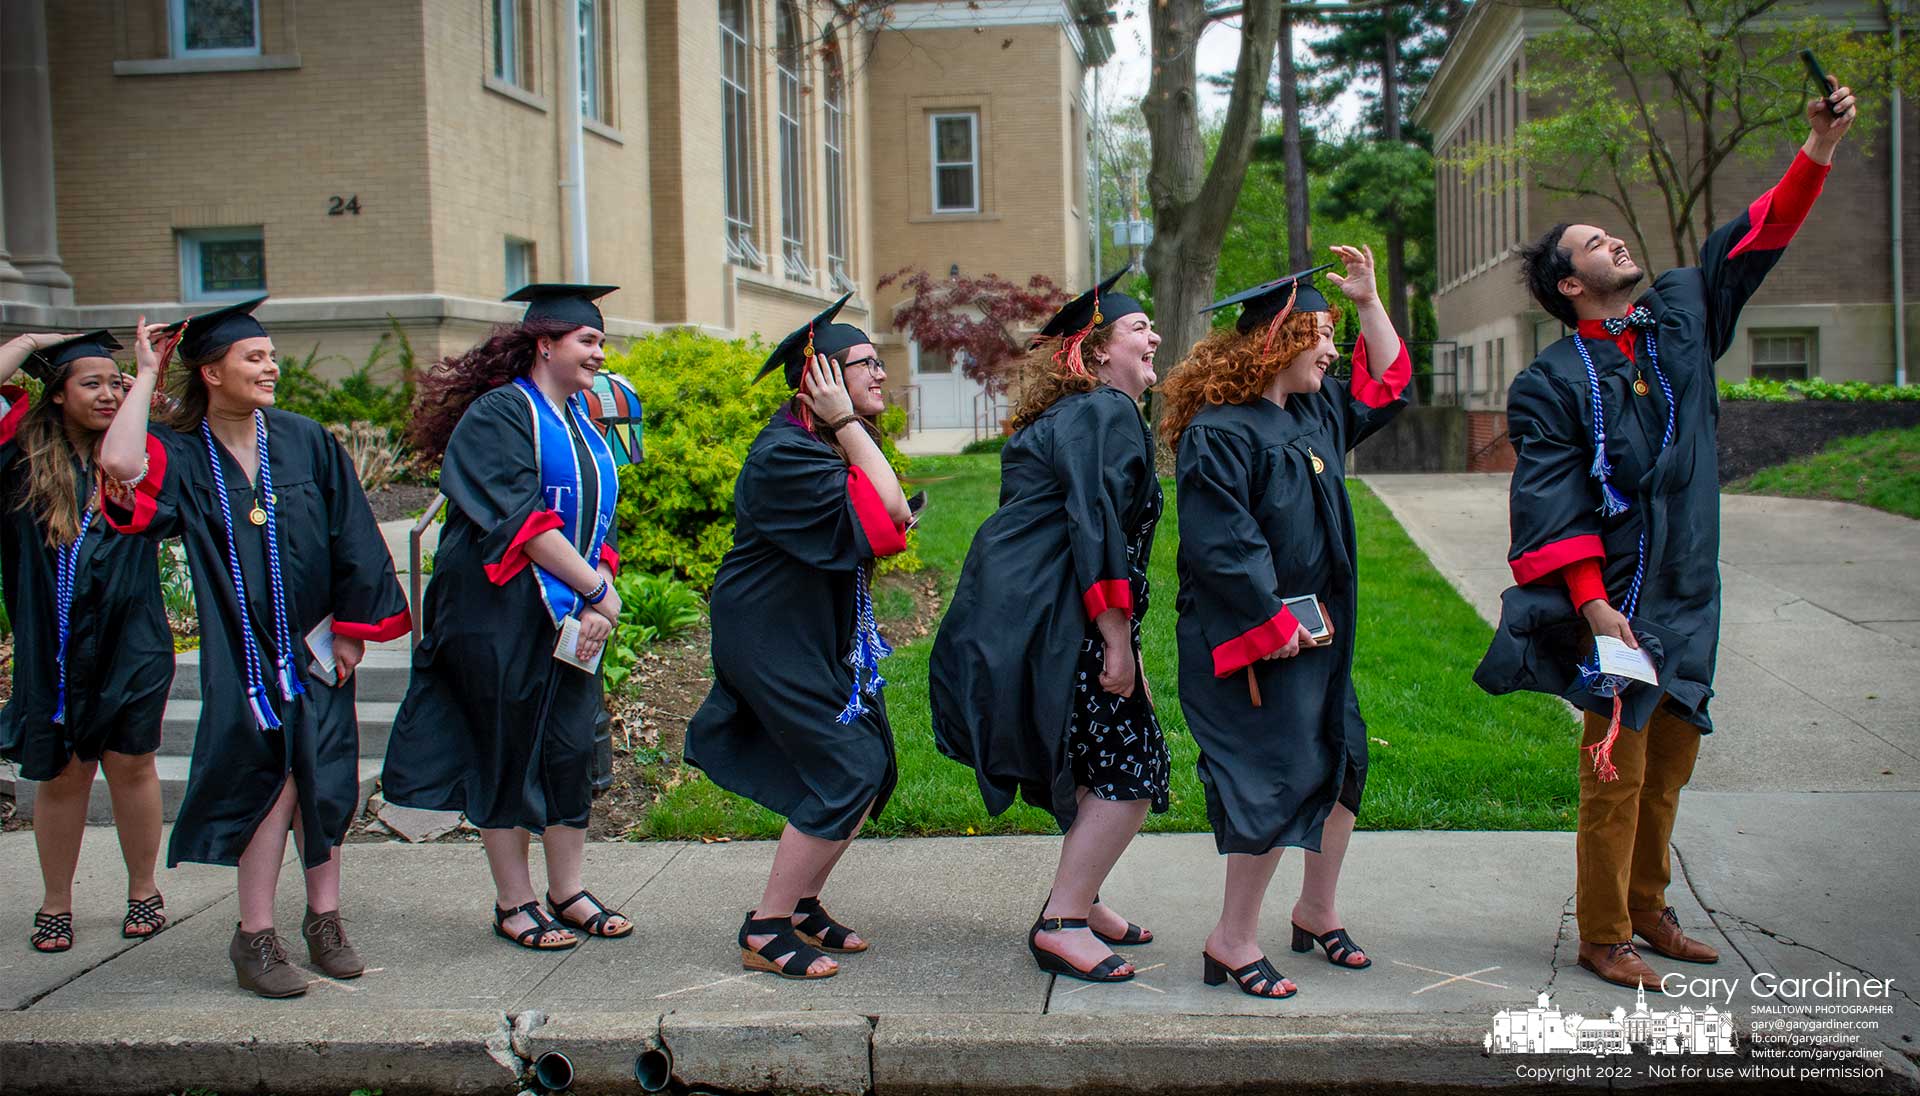 Otterbein University graduates in line for Sunday's commencement program take time for a group selfie before heading to the football stadium to receive their diplomas. My Final Photo for May 1, 2022.